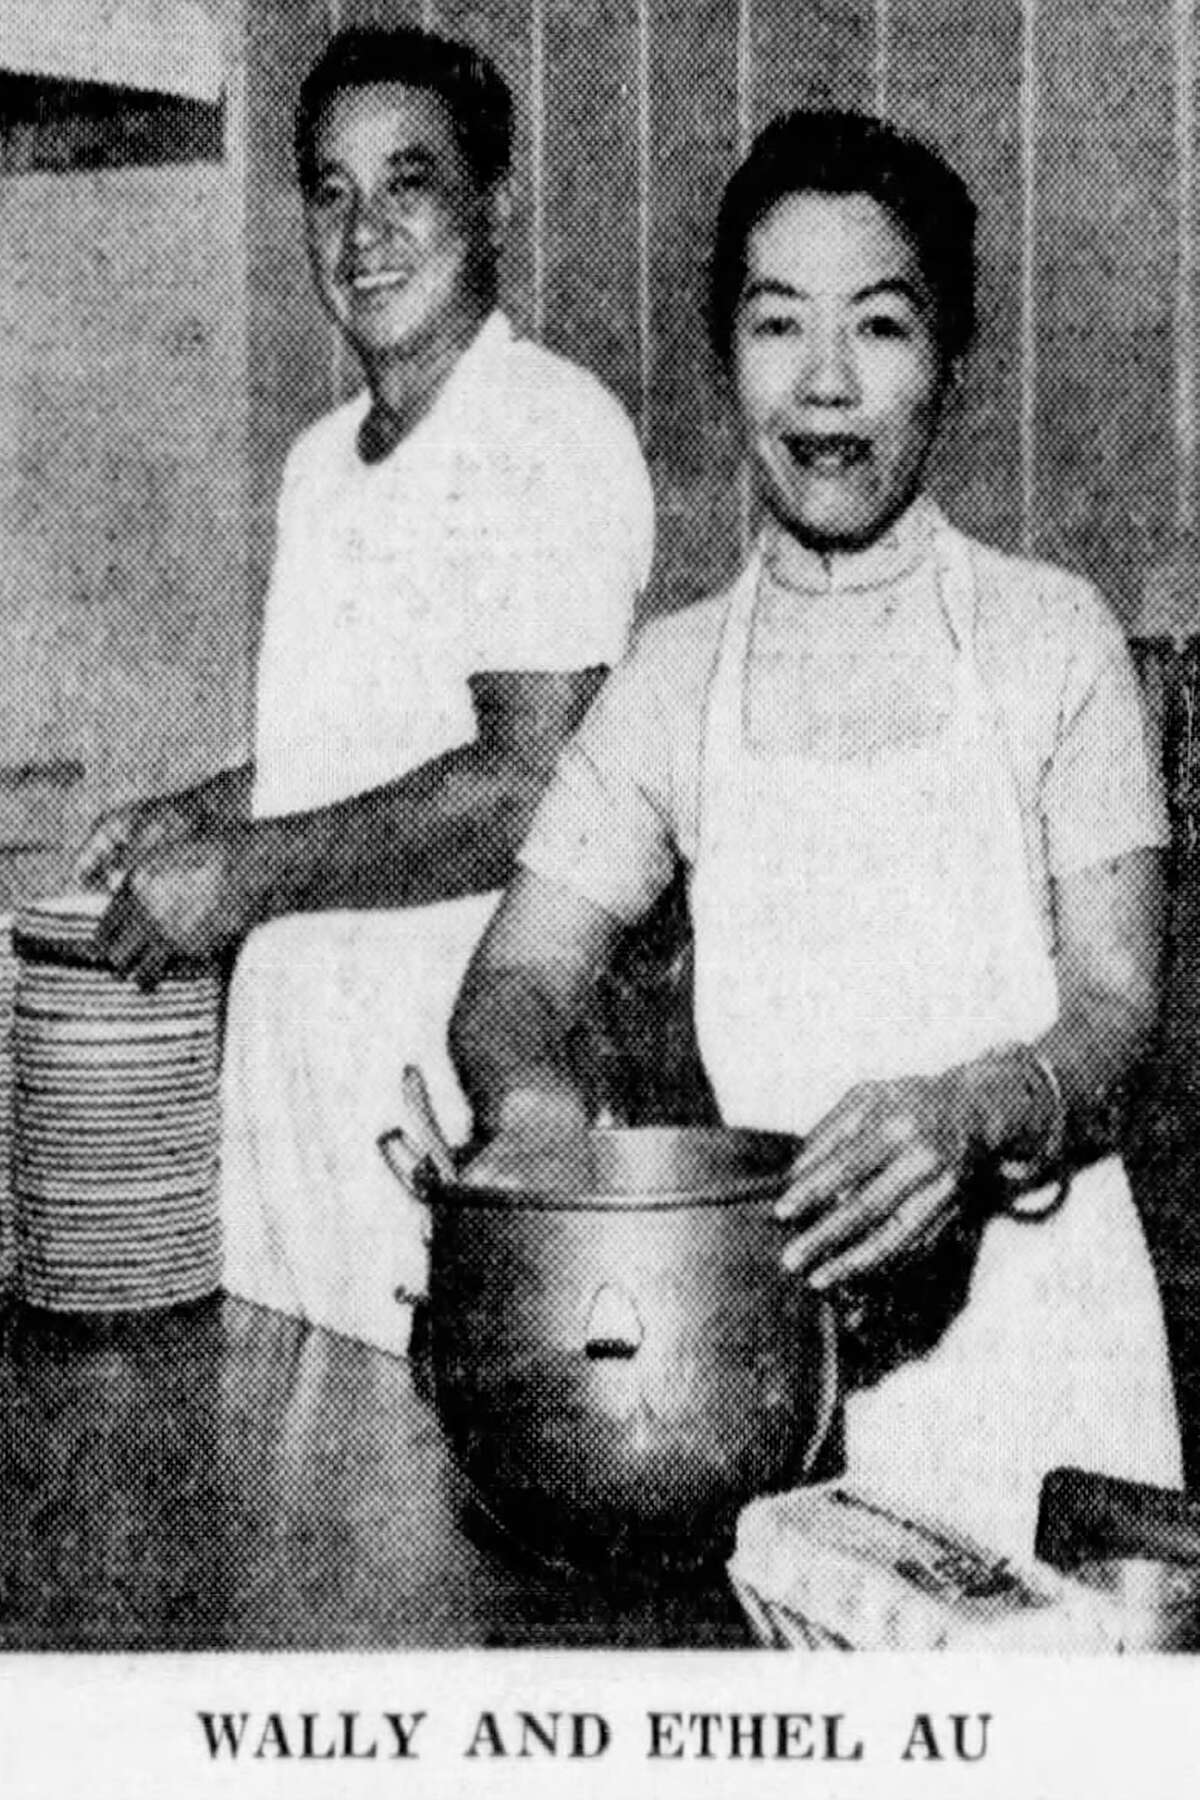 In the 1950s, Wallace and Ethel Au were the first operators of the hotel, then known as Lanai Inn.